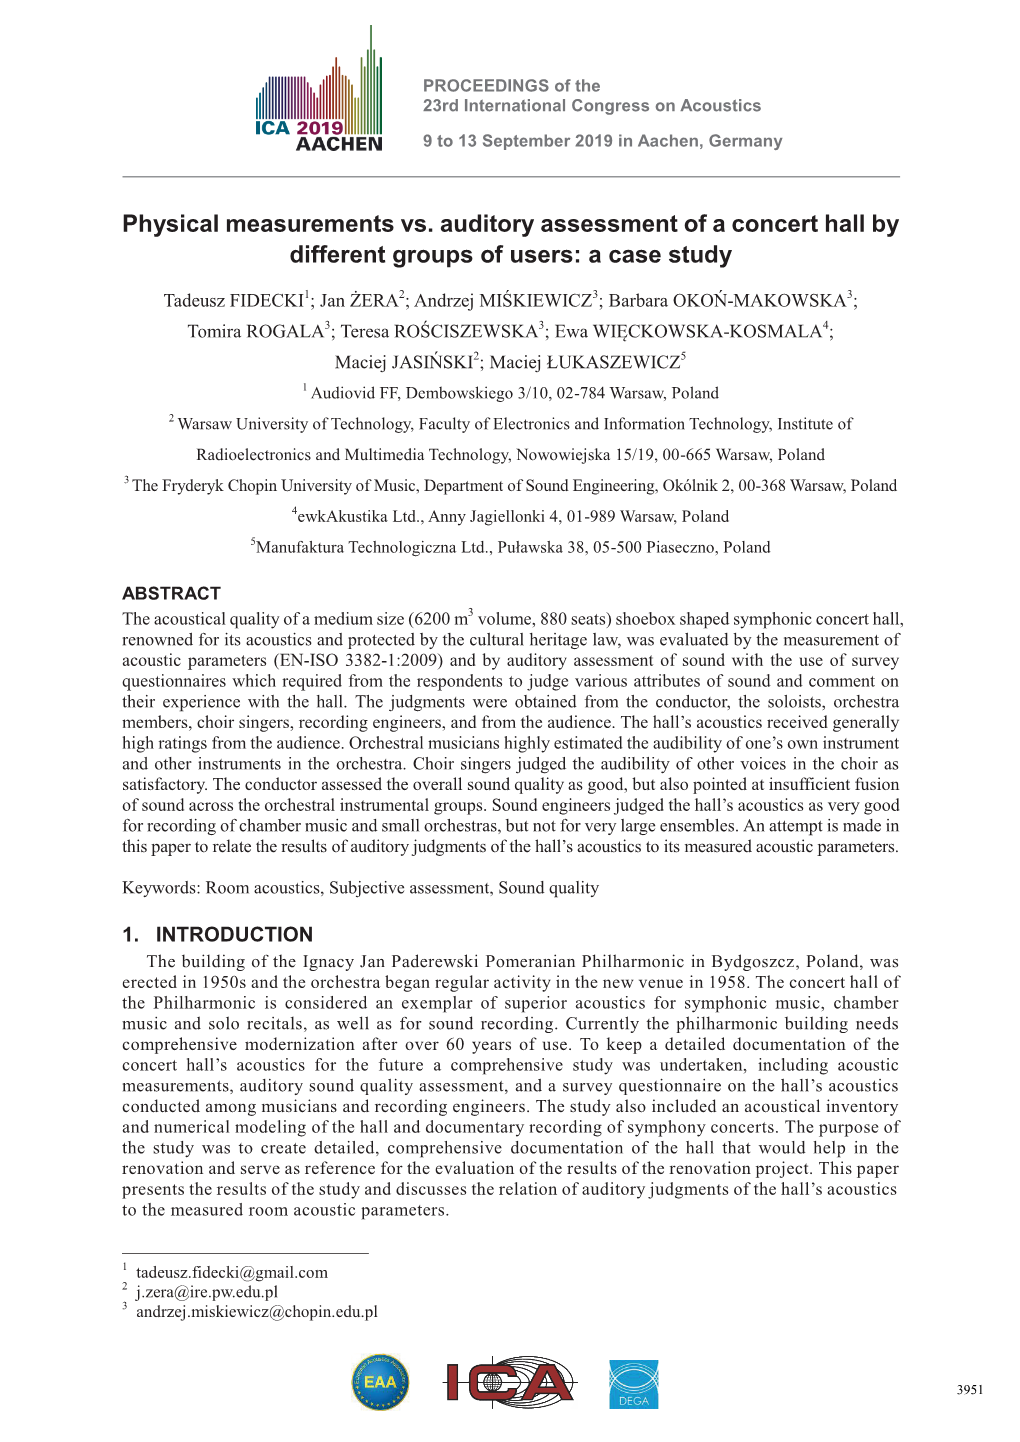 Physical Measurements Vs. Auditory Assessment of a Concert Hall by Different Groups of Users: a Case Study